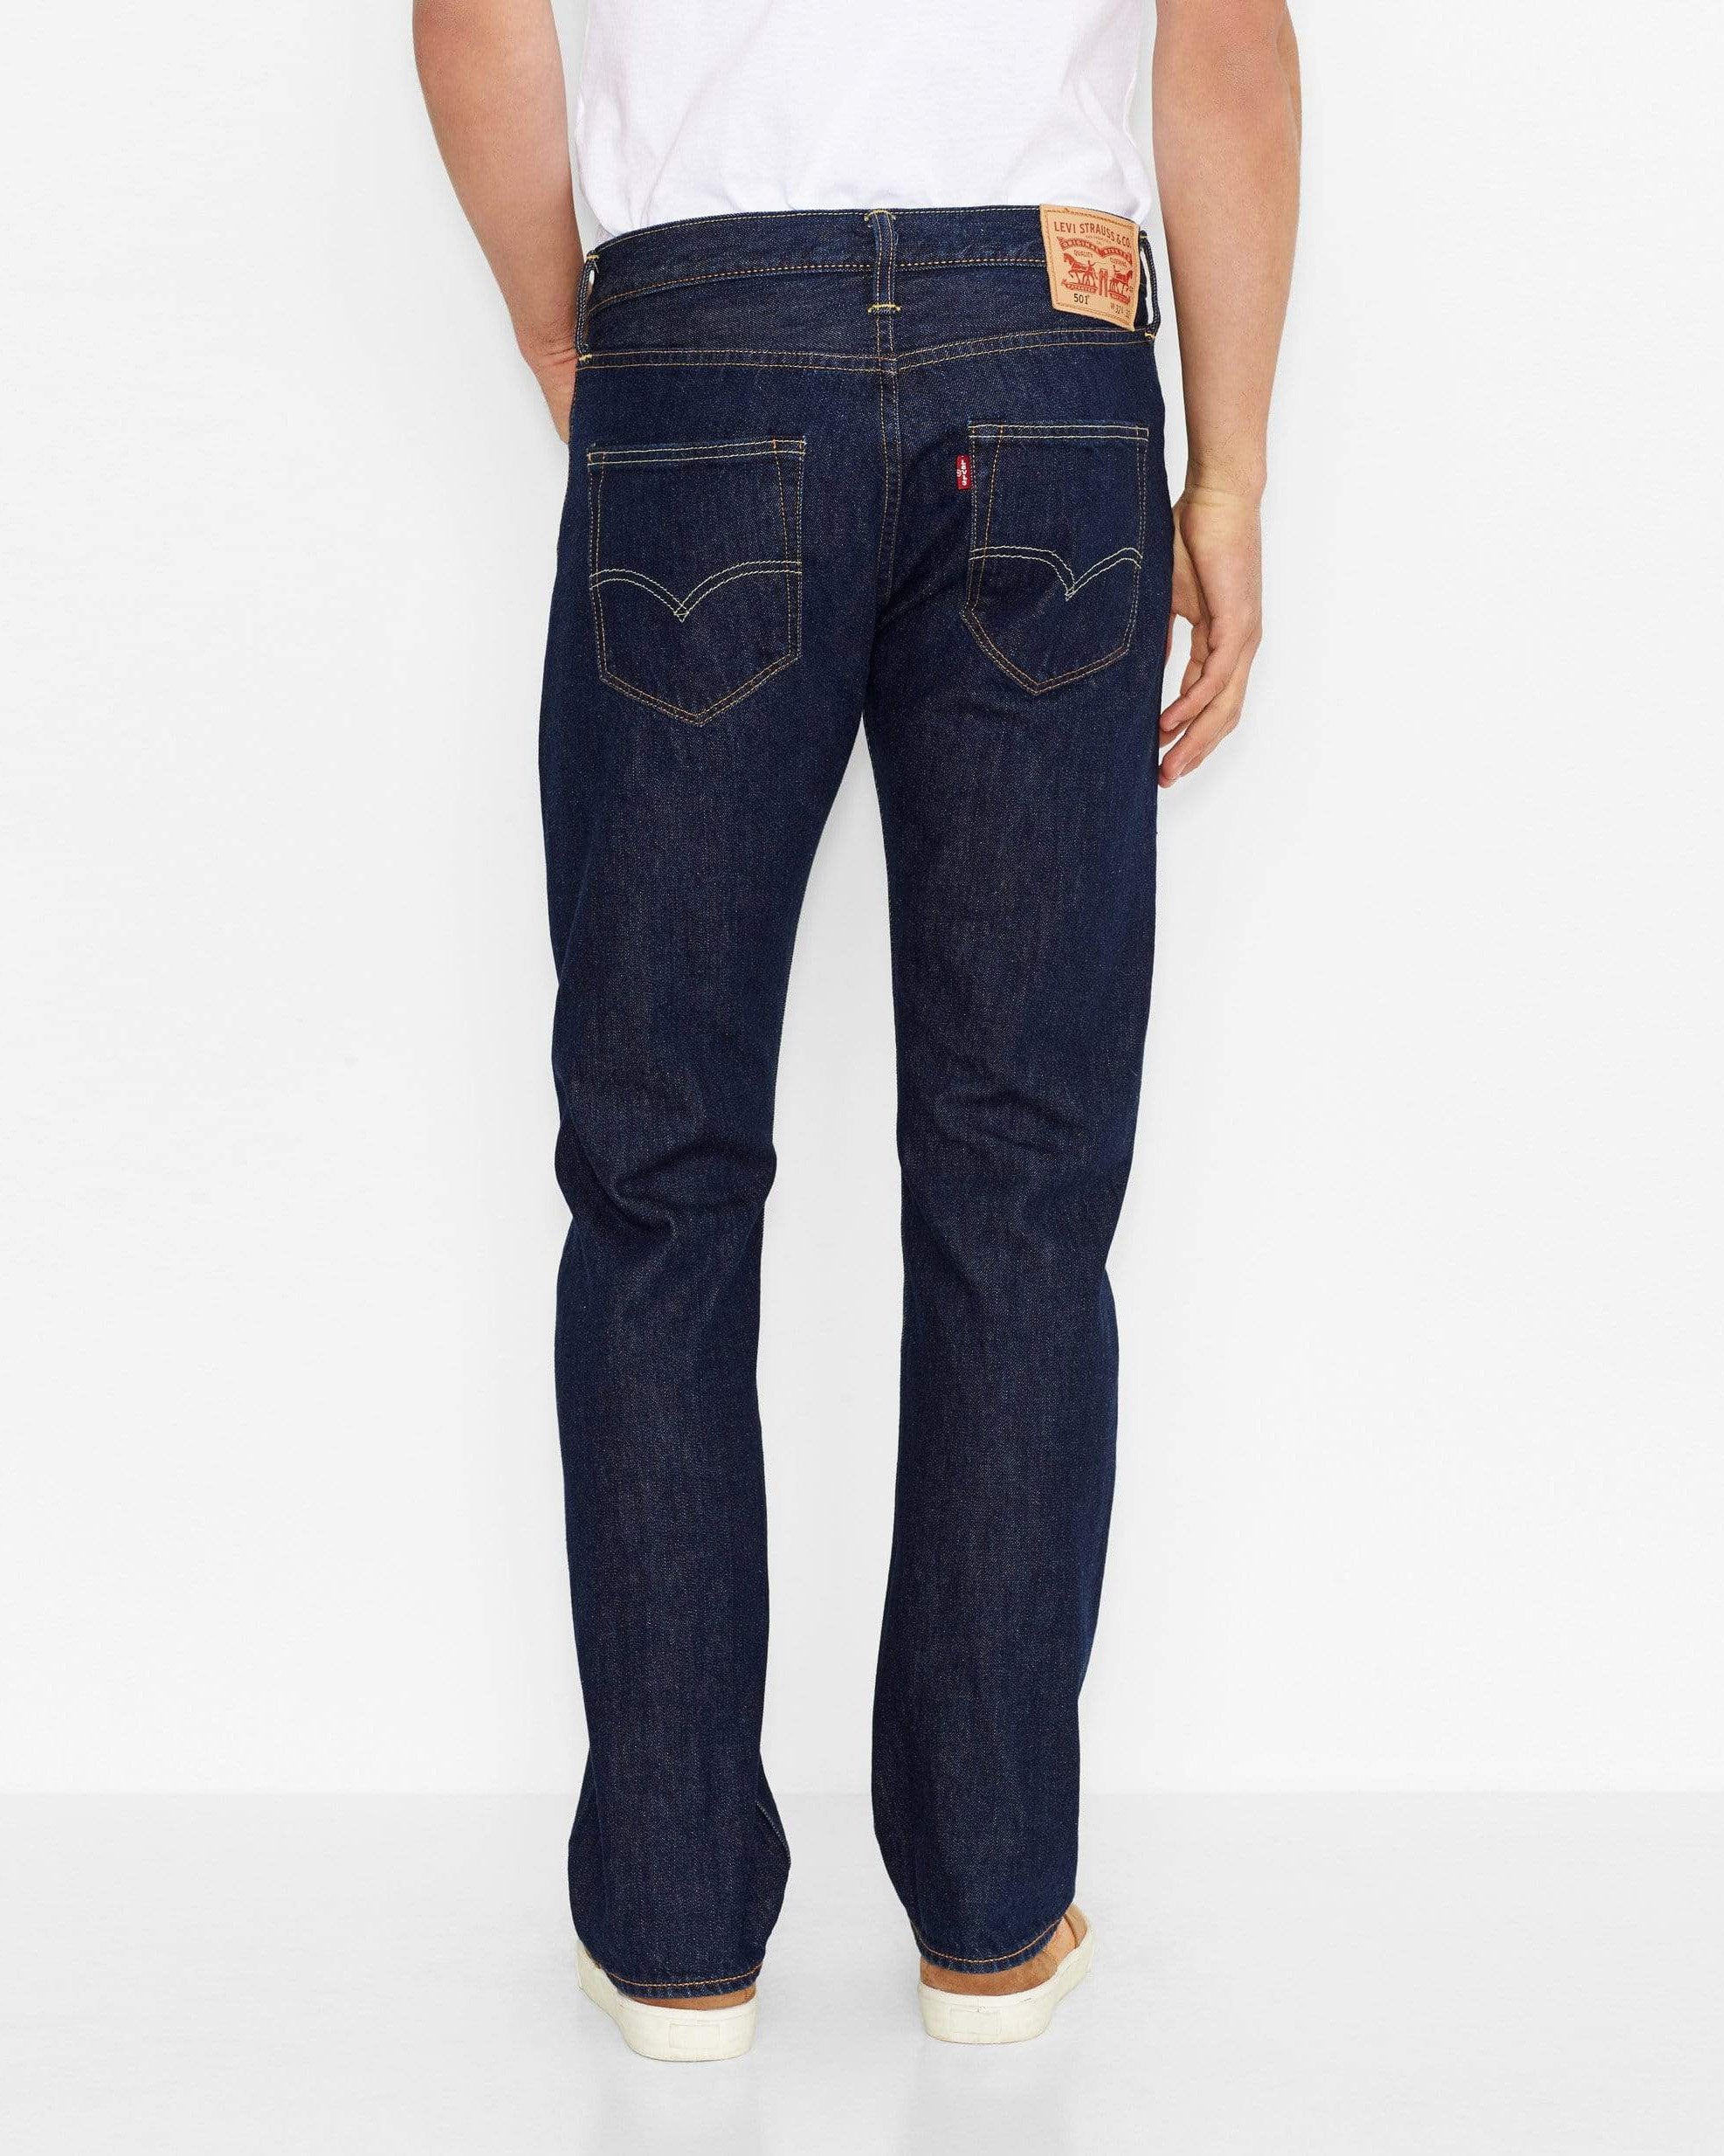 Levis 501 Original Regular Fit Mens Jeans - Onewash Blue - Jeans and Street  Fashion from Jeanstore